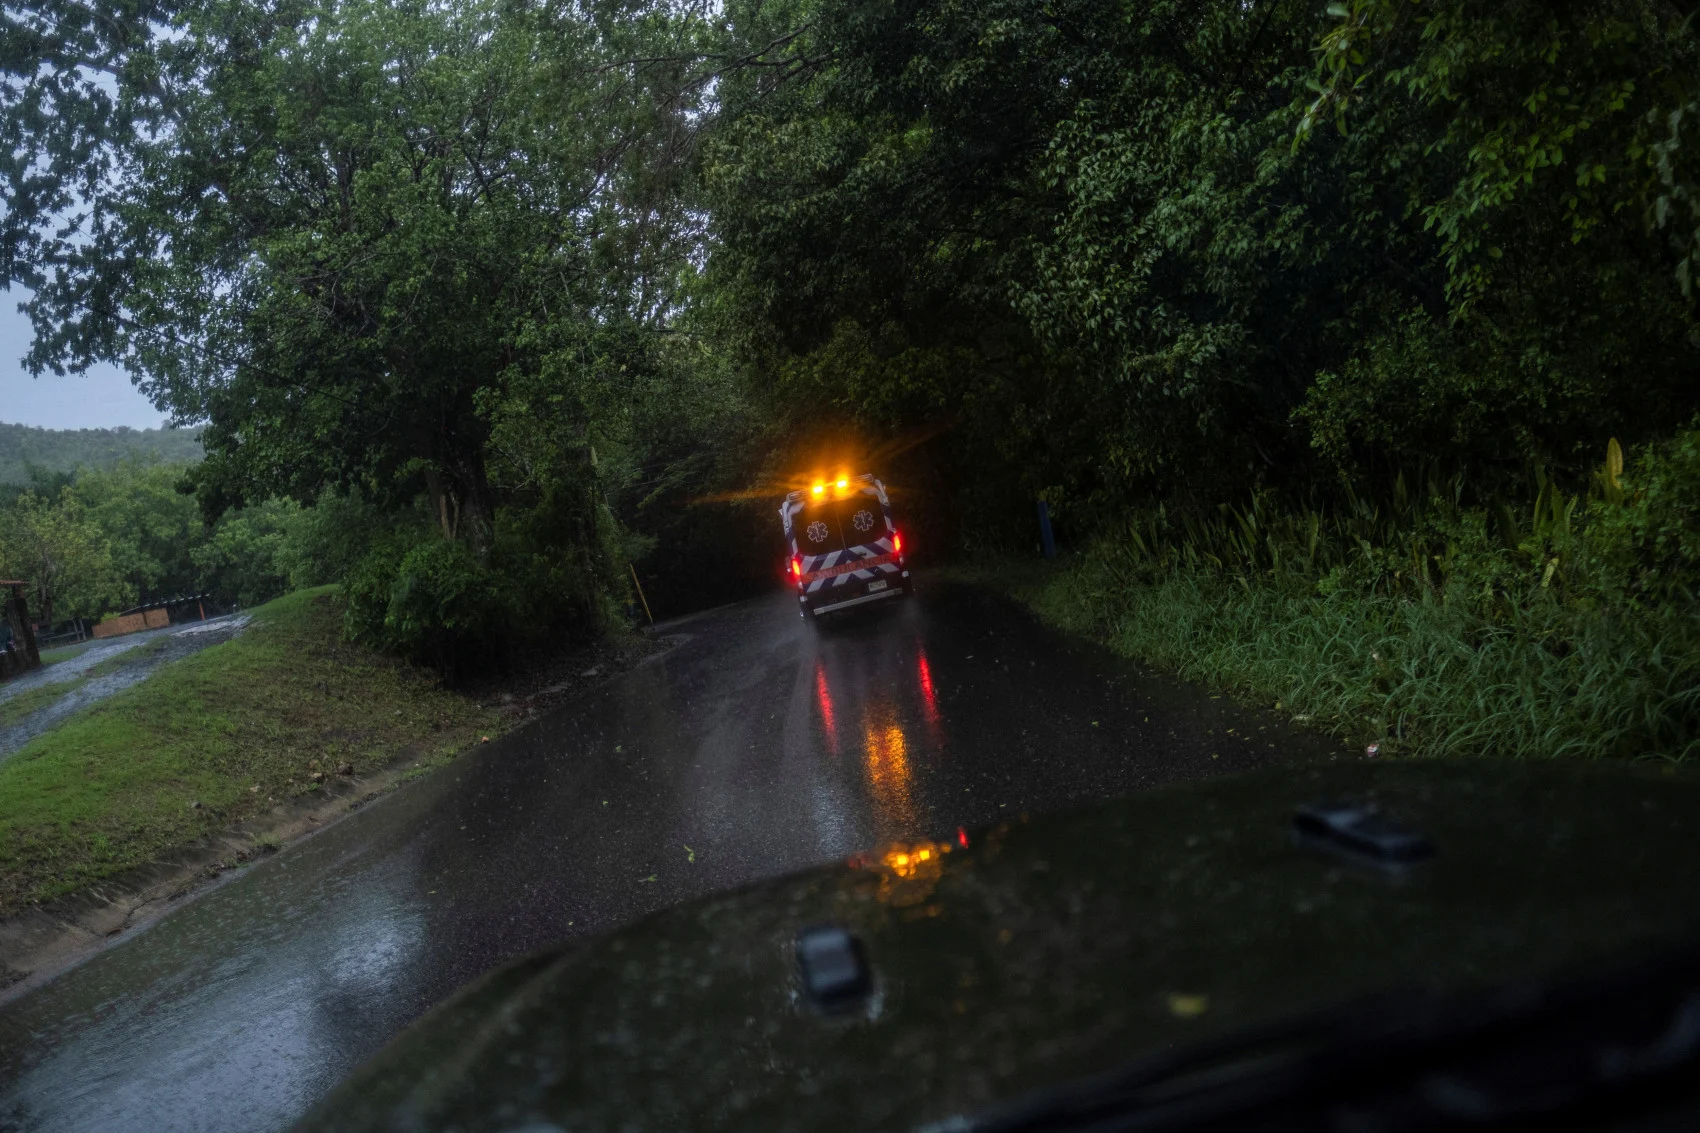 An ambulance drives through a wet rural road as Hurricane Fiona and its heavy rains approaches in Guayanilla, Puerto Rico September 18, 2022. (REUTERS/Ricardo Arduengo)